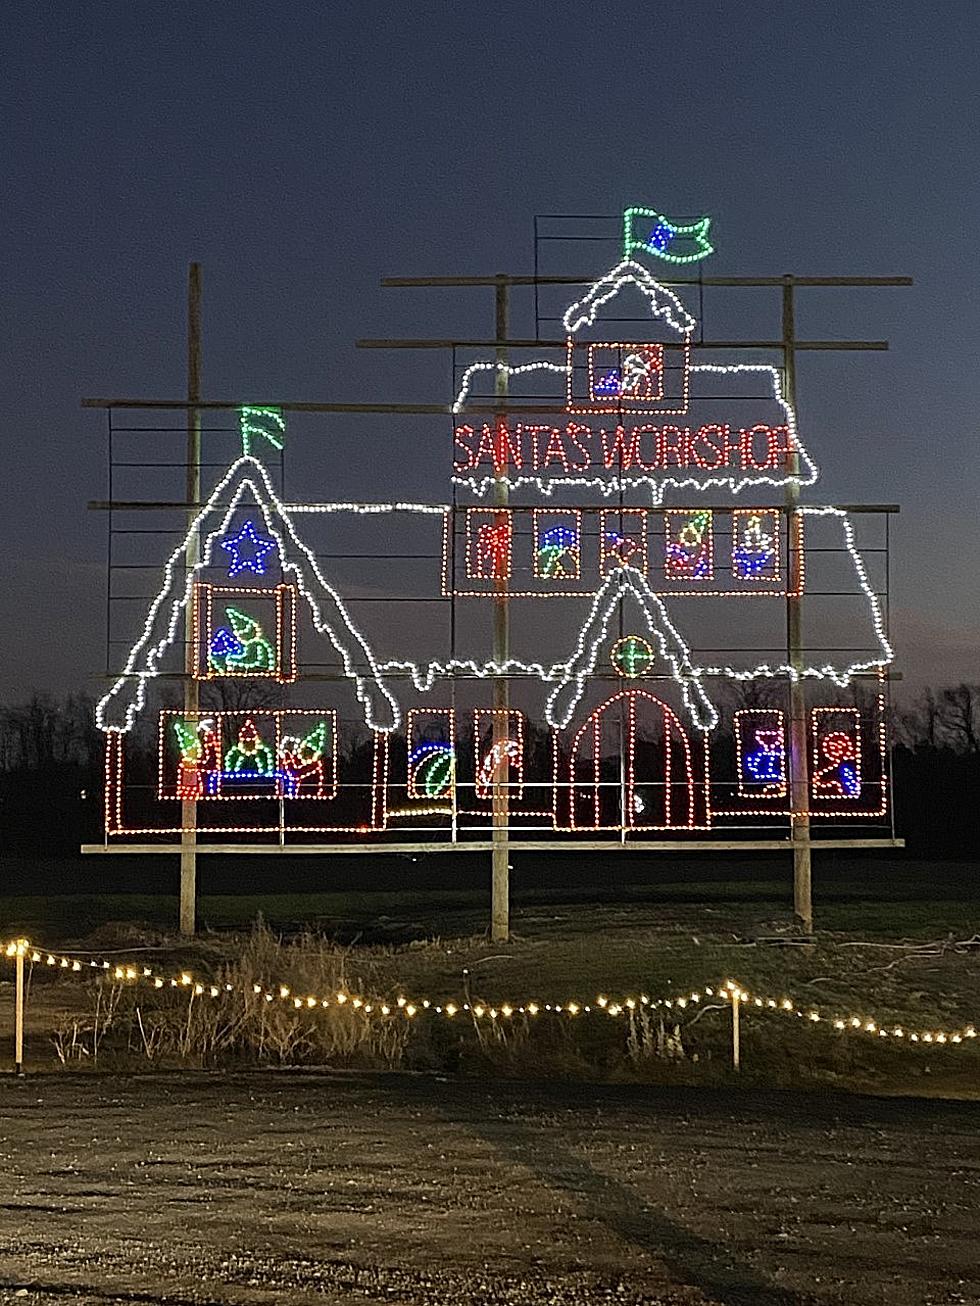 Holiday Light Show Still Open With Reduced Price at Shady Brook Farm in Yardley, PA